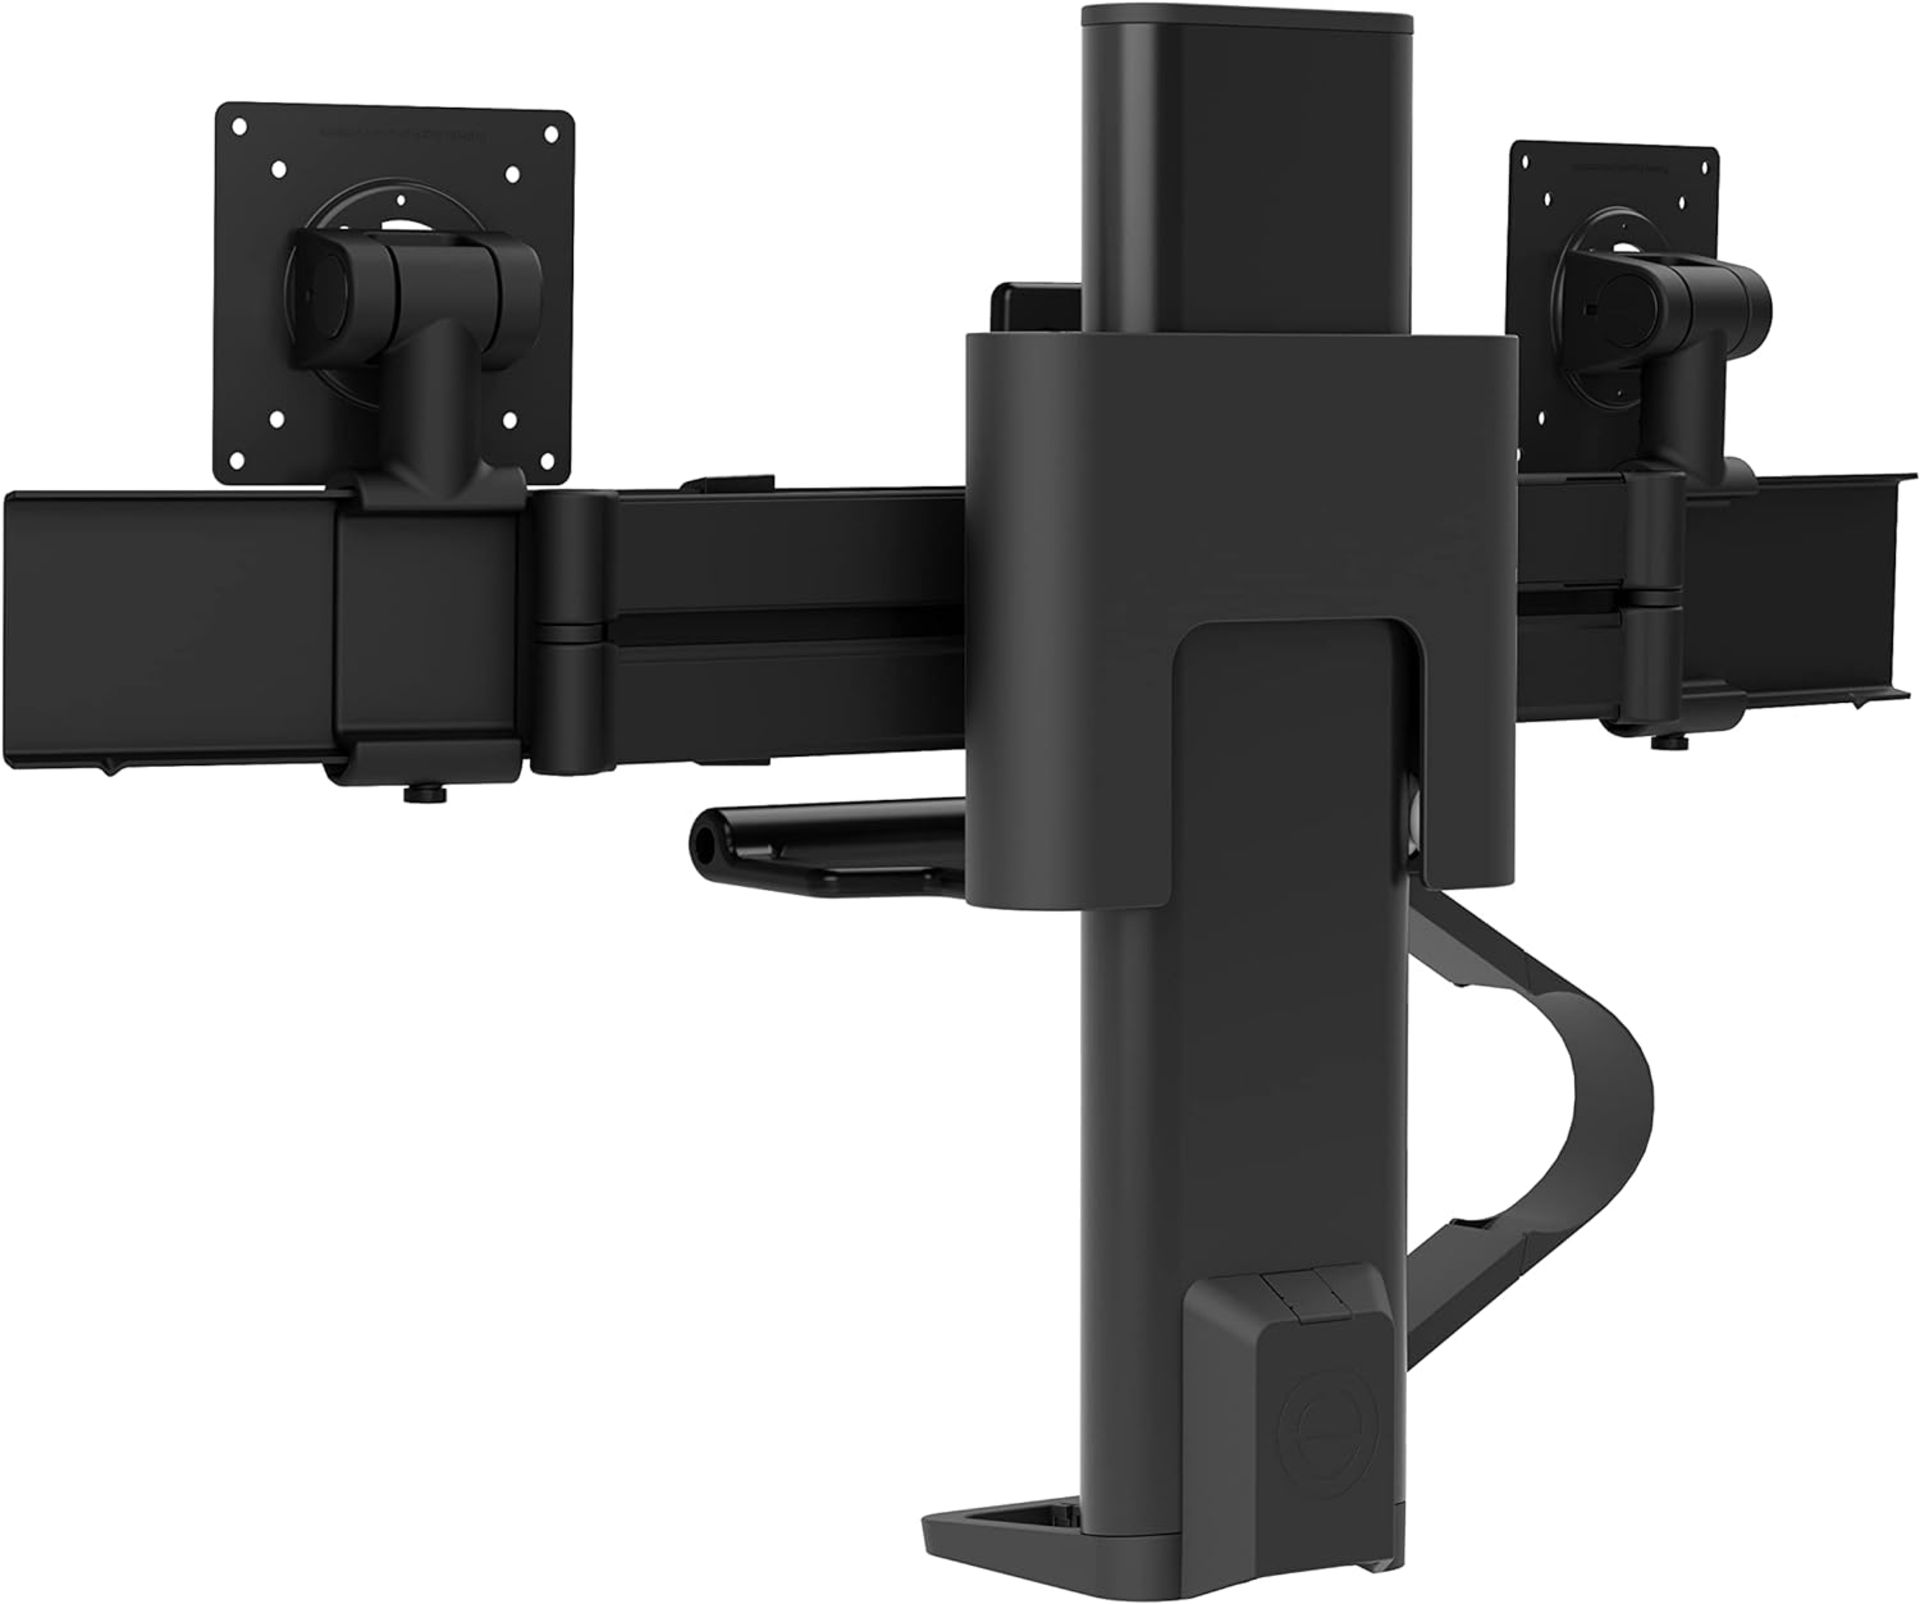 NEW & BOXED ERGOTRON Trace Dual Monitor Arm, VESA Desk Mount. RRP £417. for 2 Monitors Up to 27 - Image 7 of 8